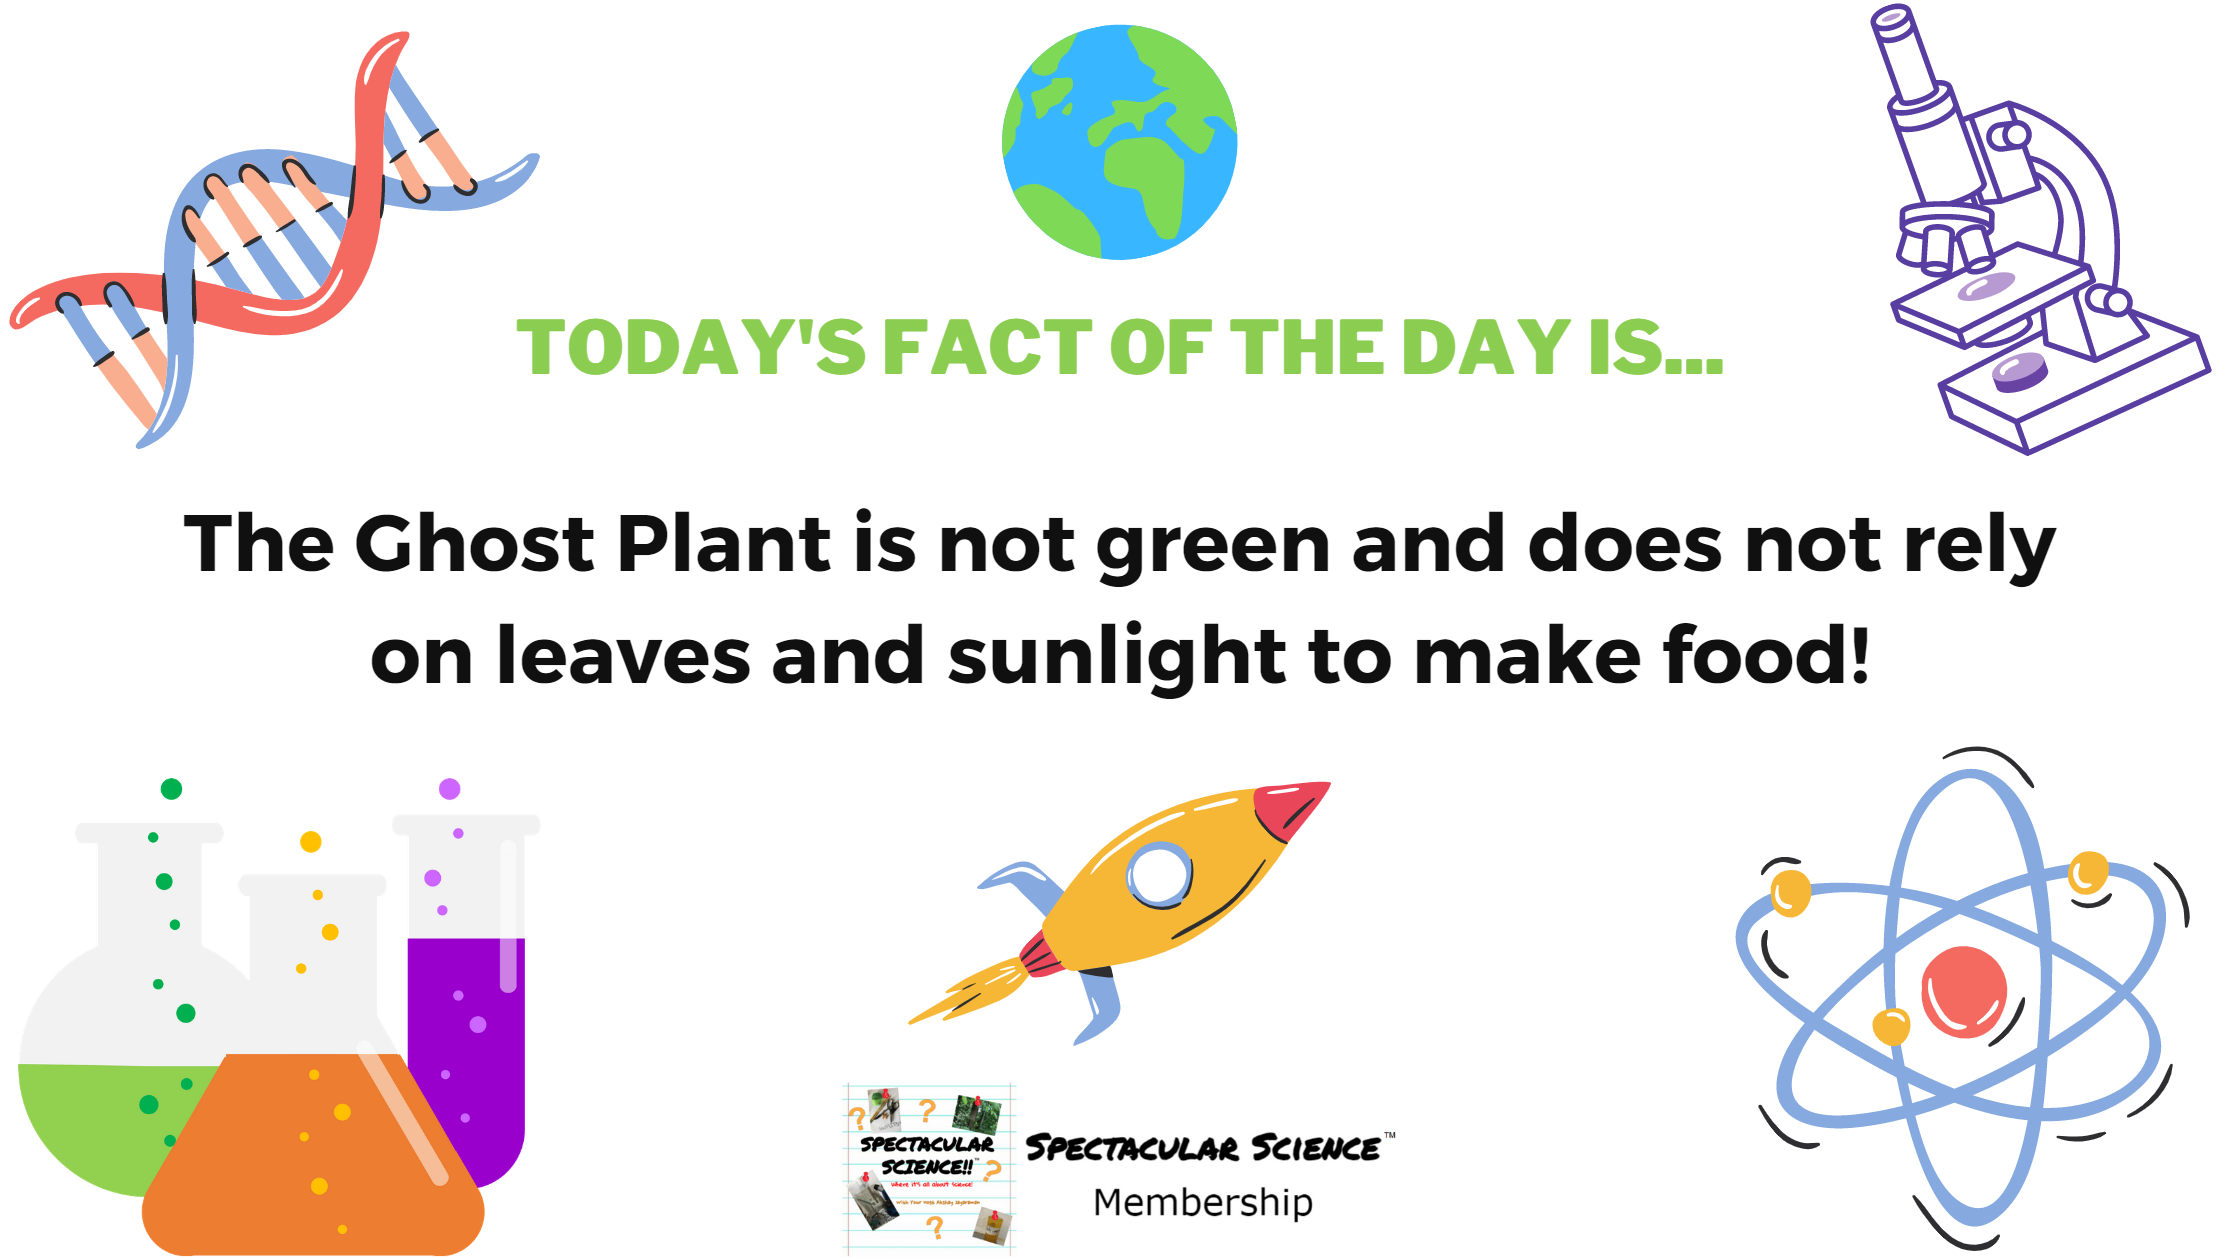 Fact of the Day Image March 3rd